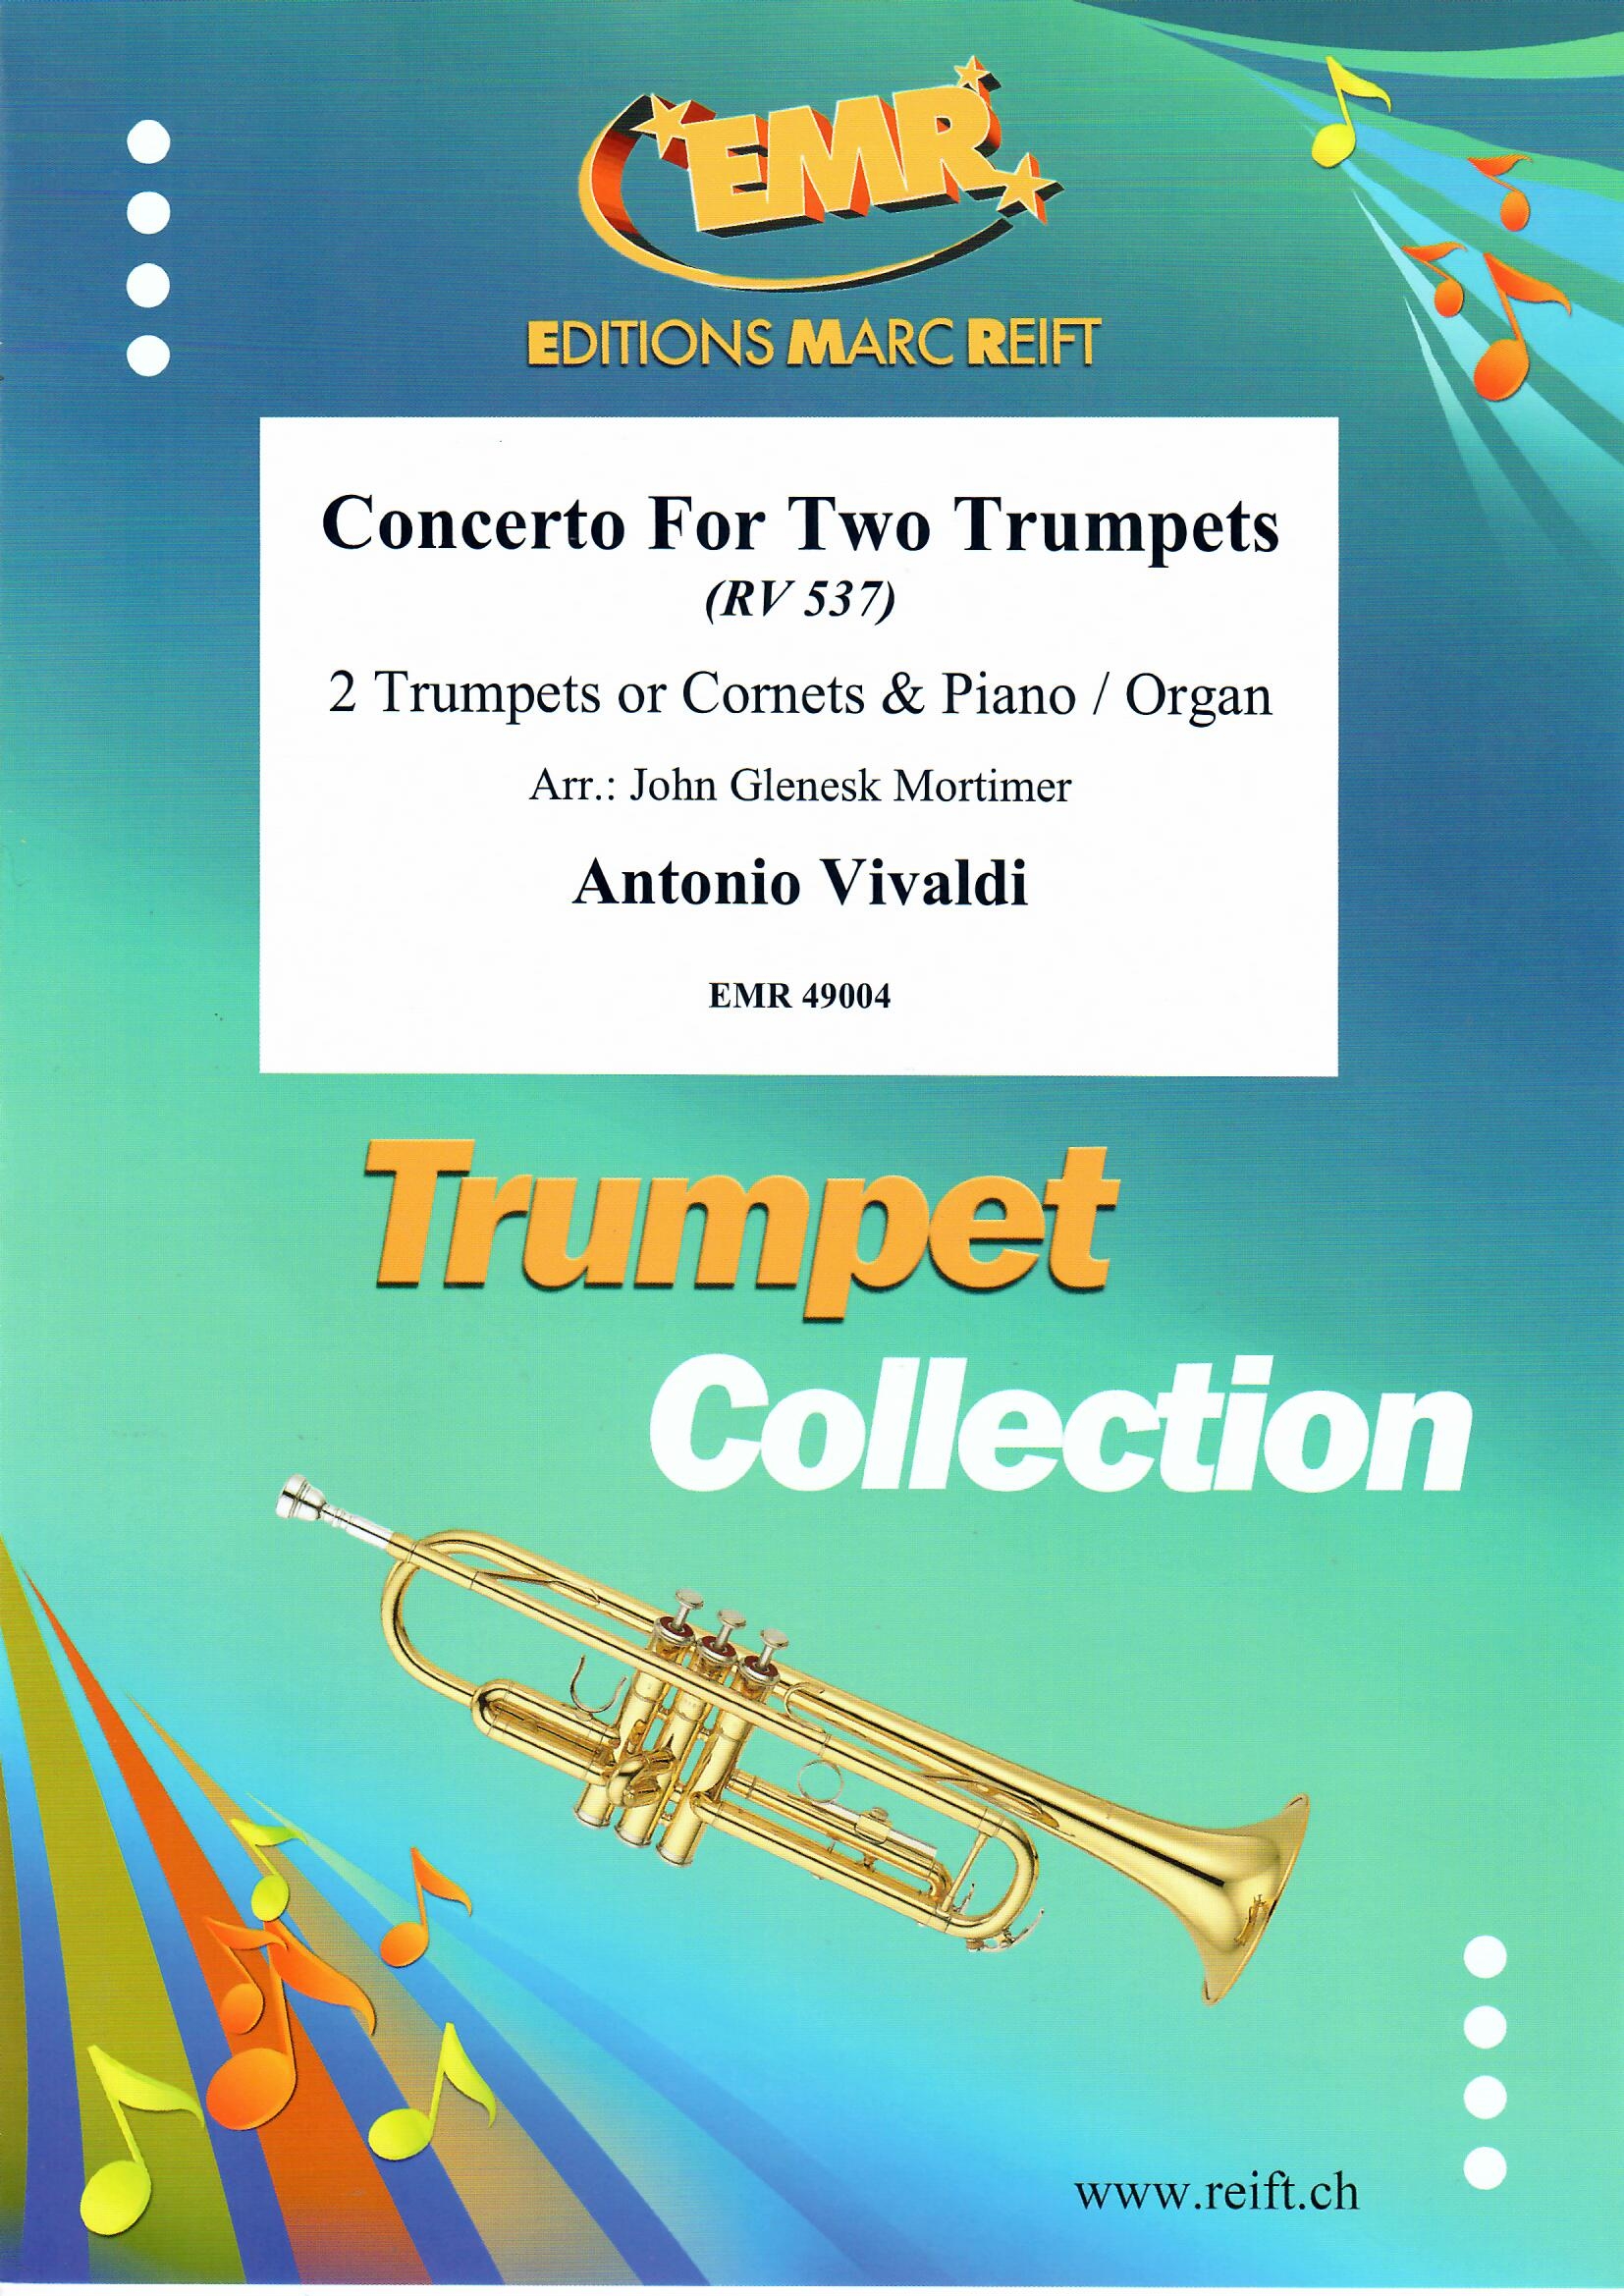 CONCERTO FOR TWO TRUMPETS & organ